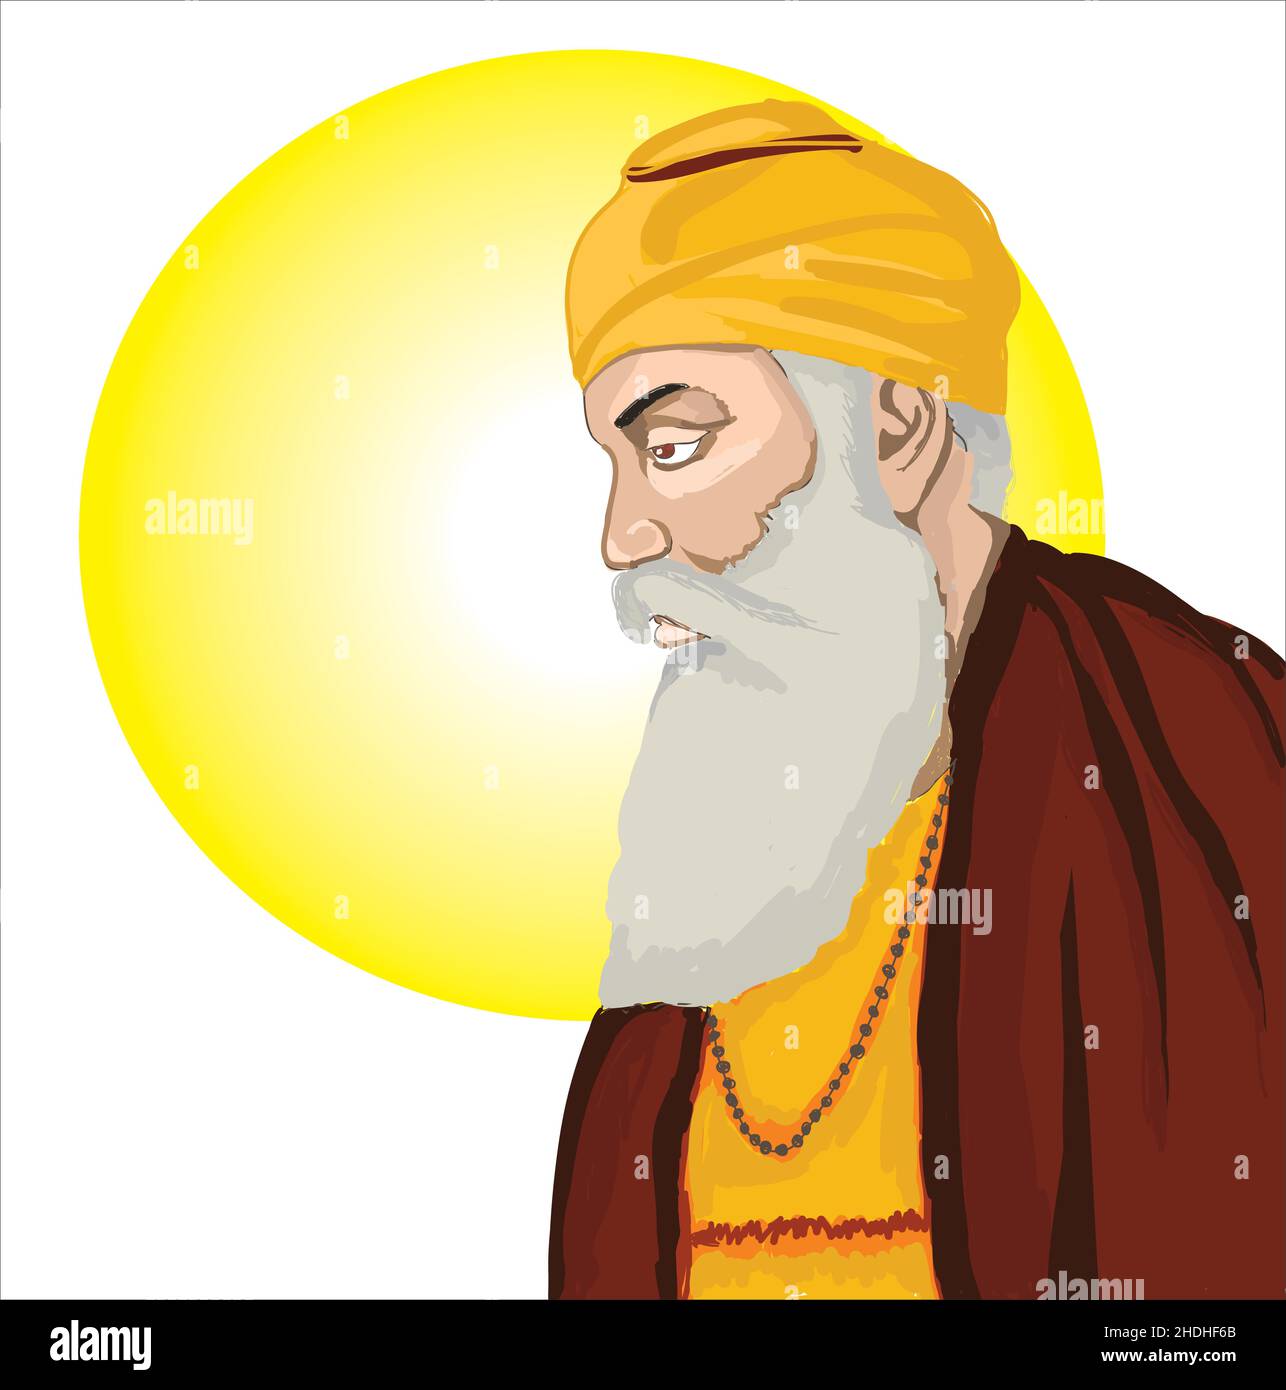 Sikh Stock Vector Images - Alamy